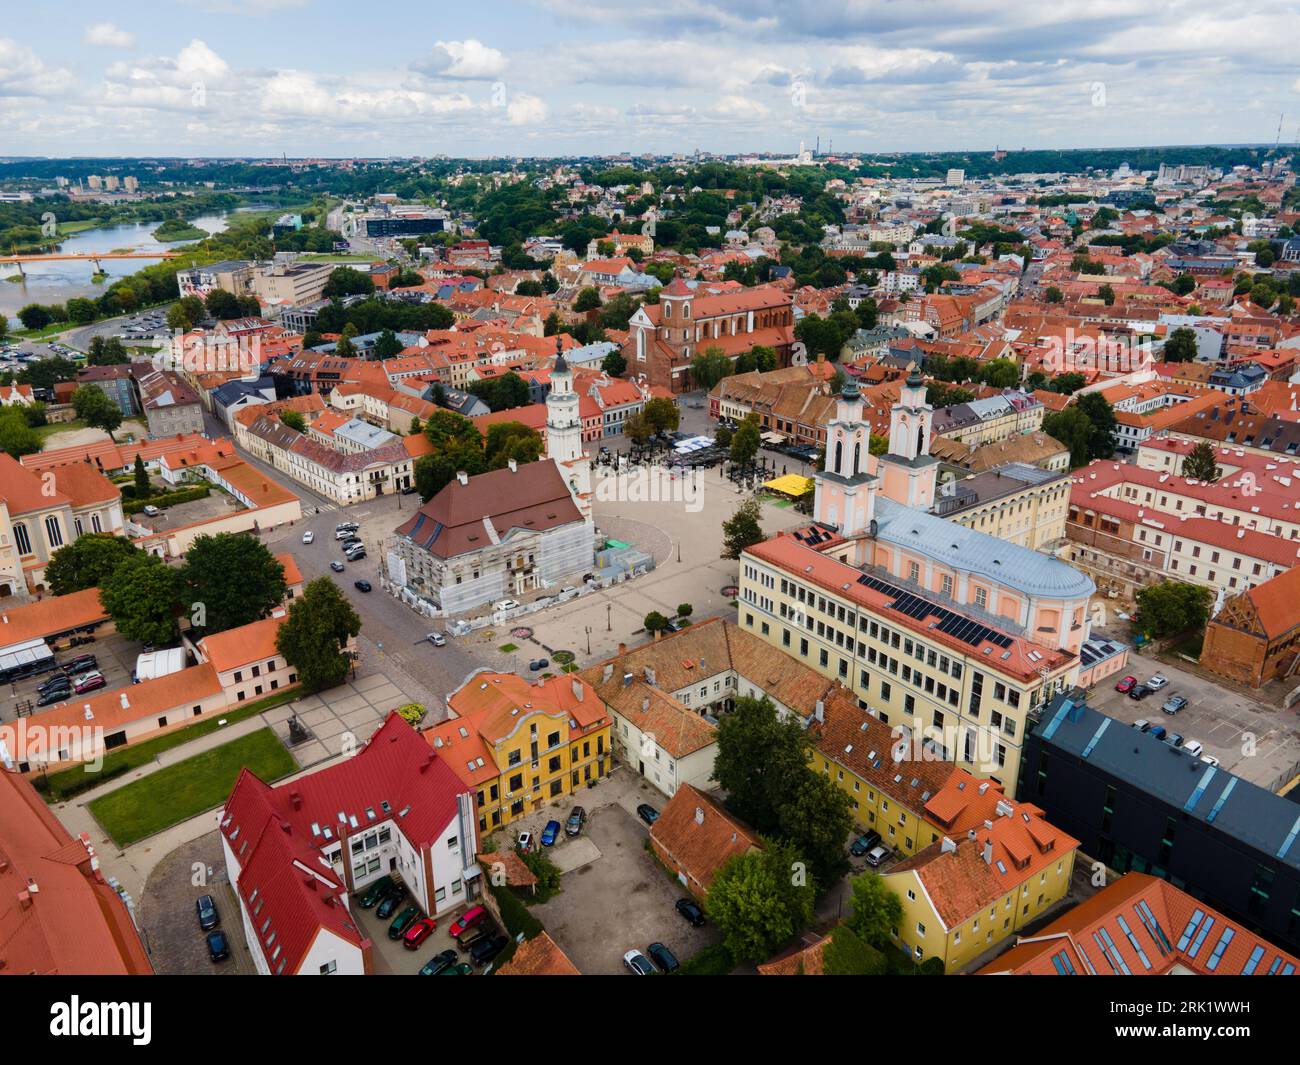 A picturesque aerial view of the old town of Kaunas, Lithuania Stock Photo